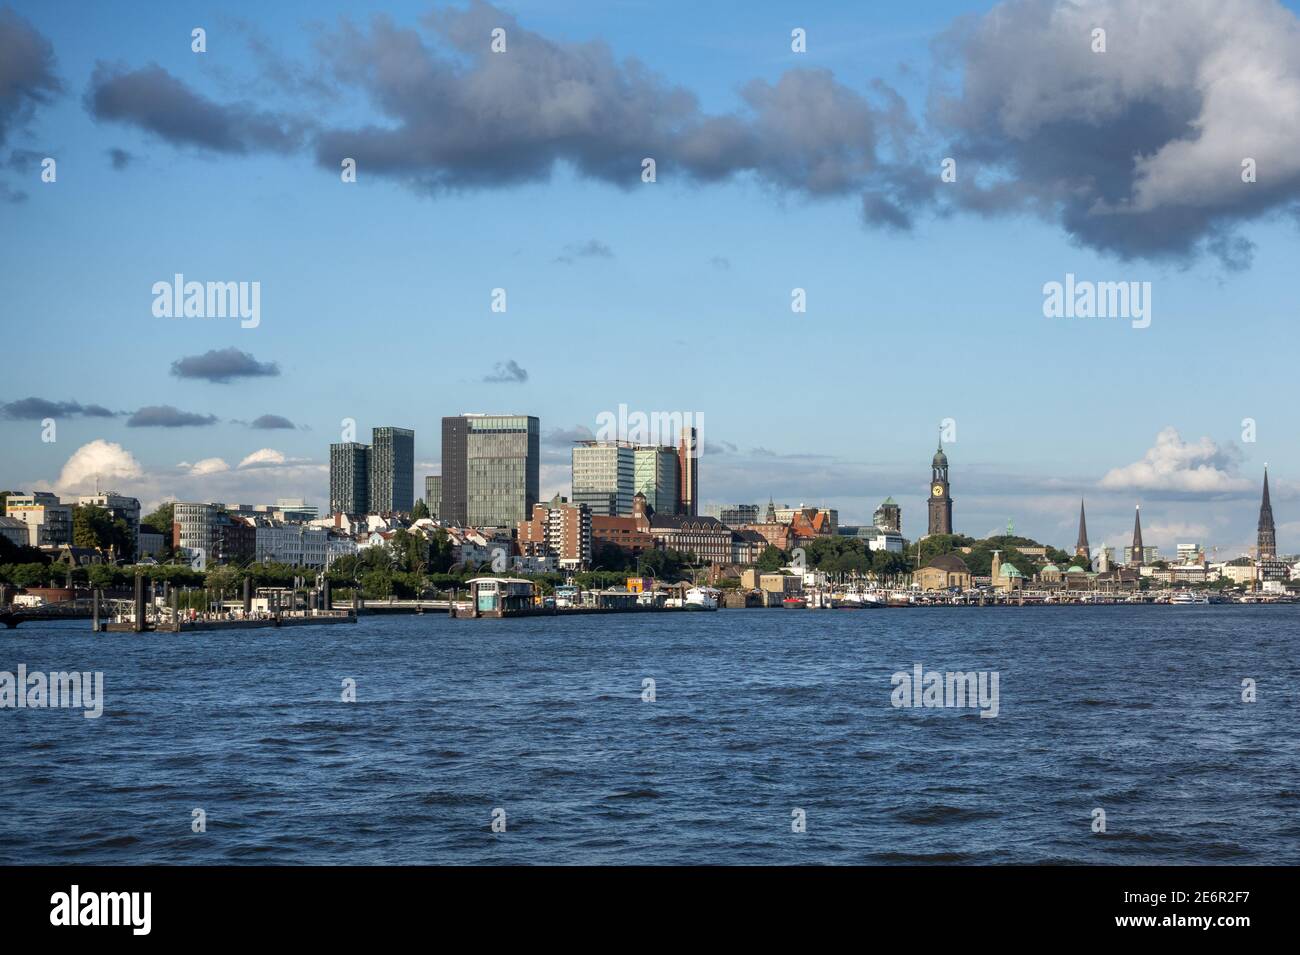 View of the cityscape of Hamburg viewed from the Elbe River in Germany Stock Photo